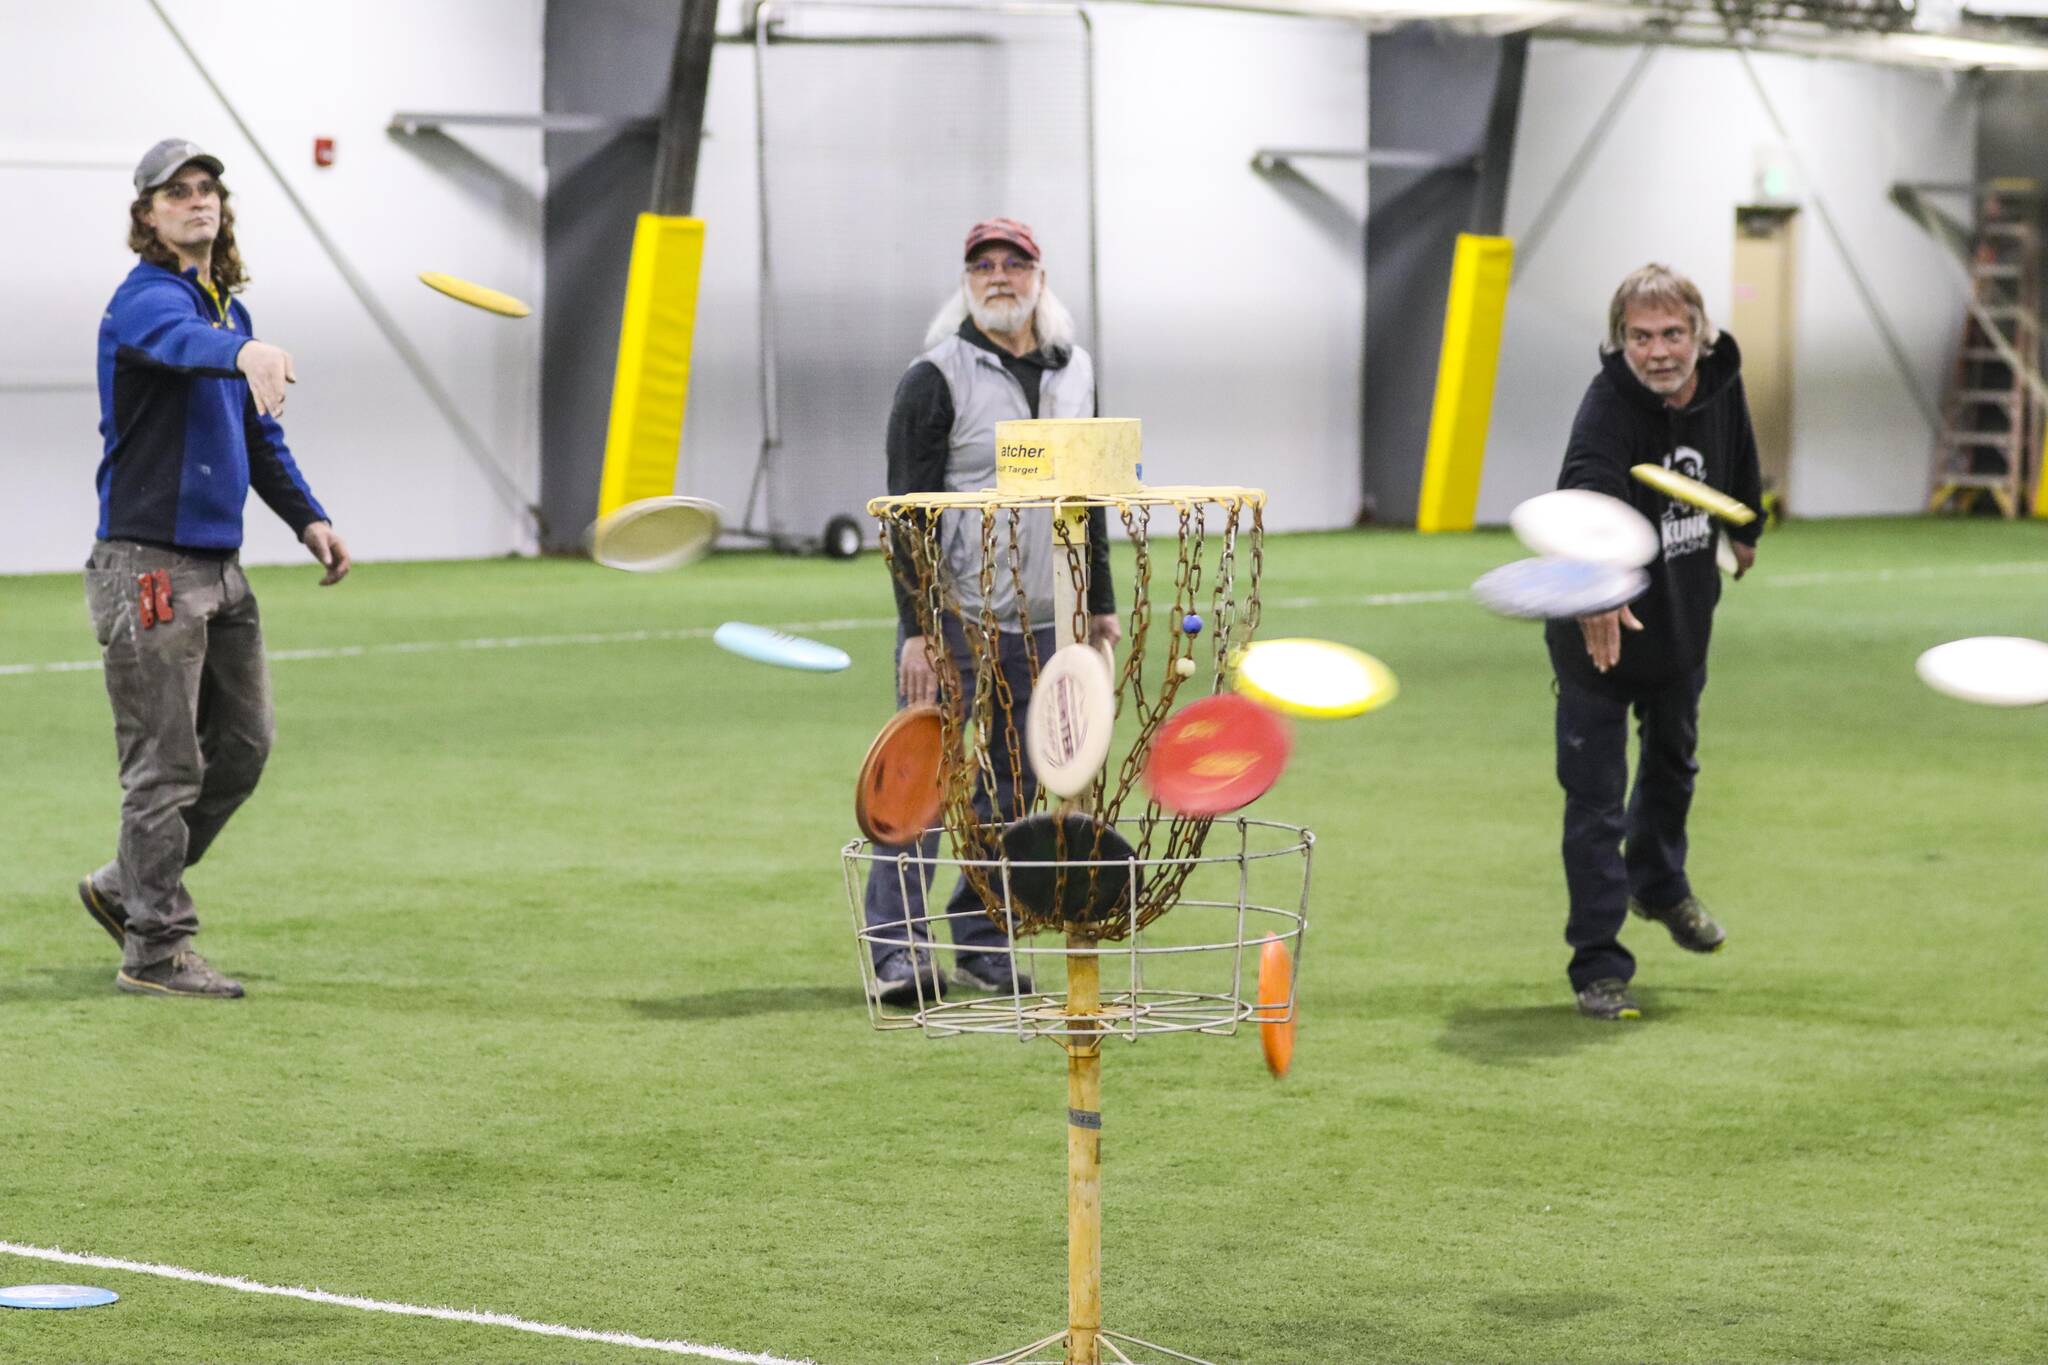 Players at a disc golf community workshop held by Uplay throw discs at the target at Dimond Park Field House on May 12, 2022. (Michael S. Lockett / Juneau Empire)